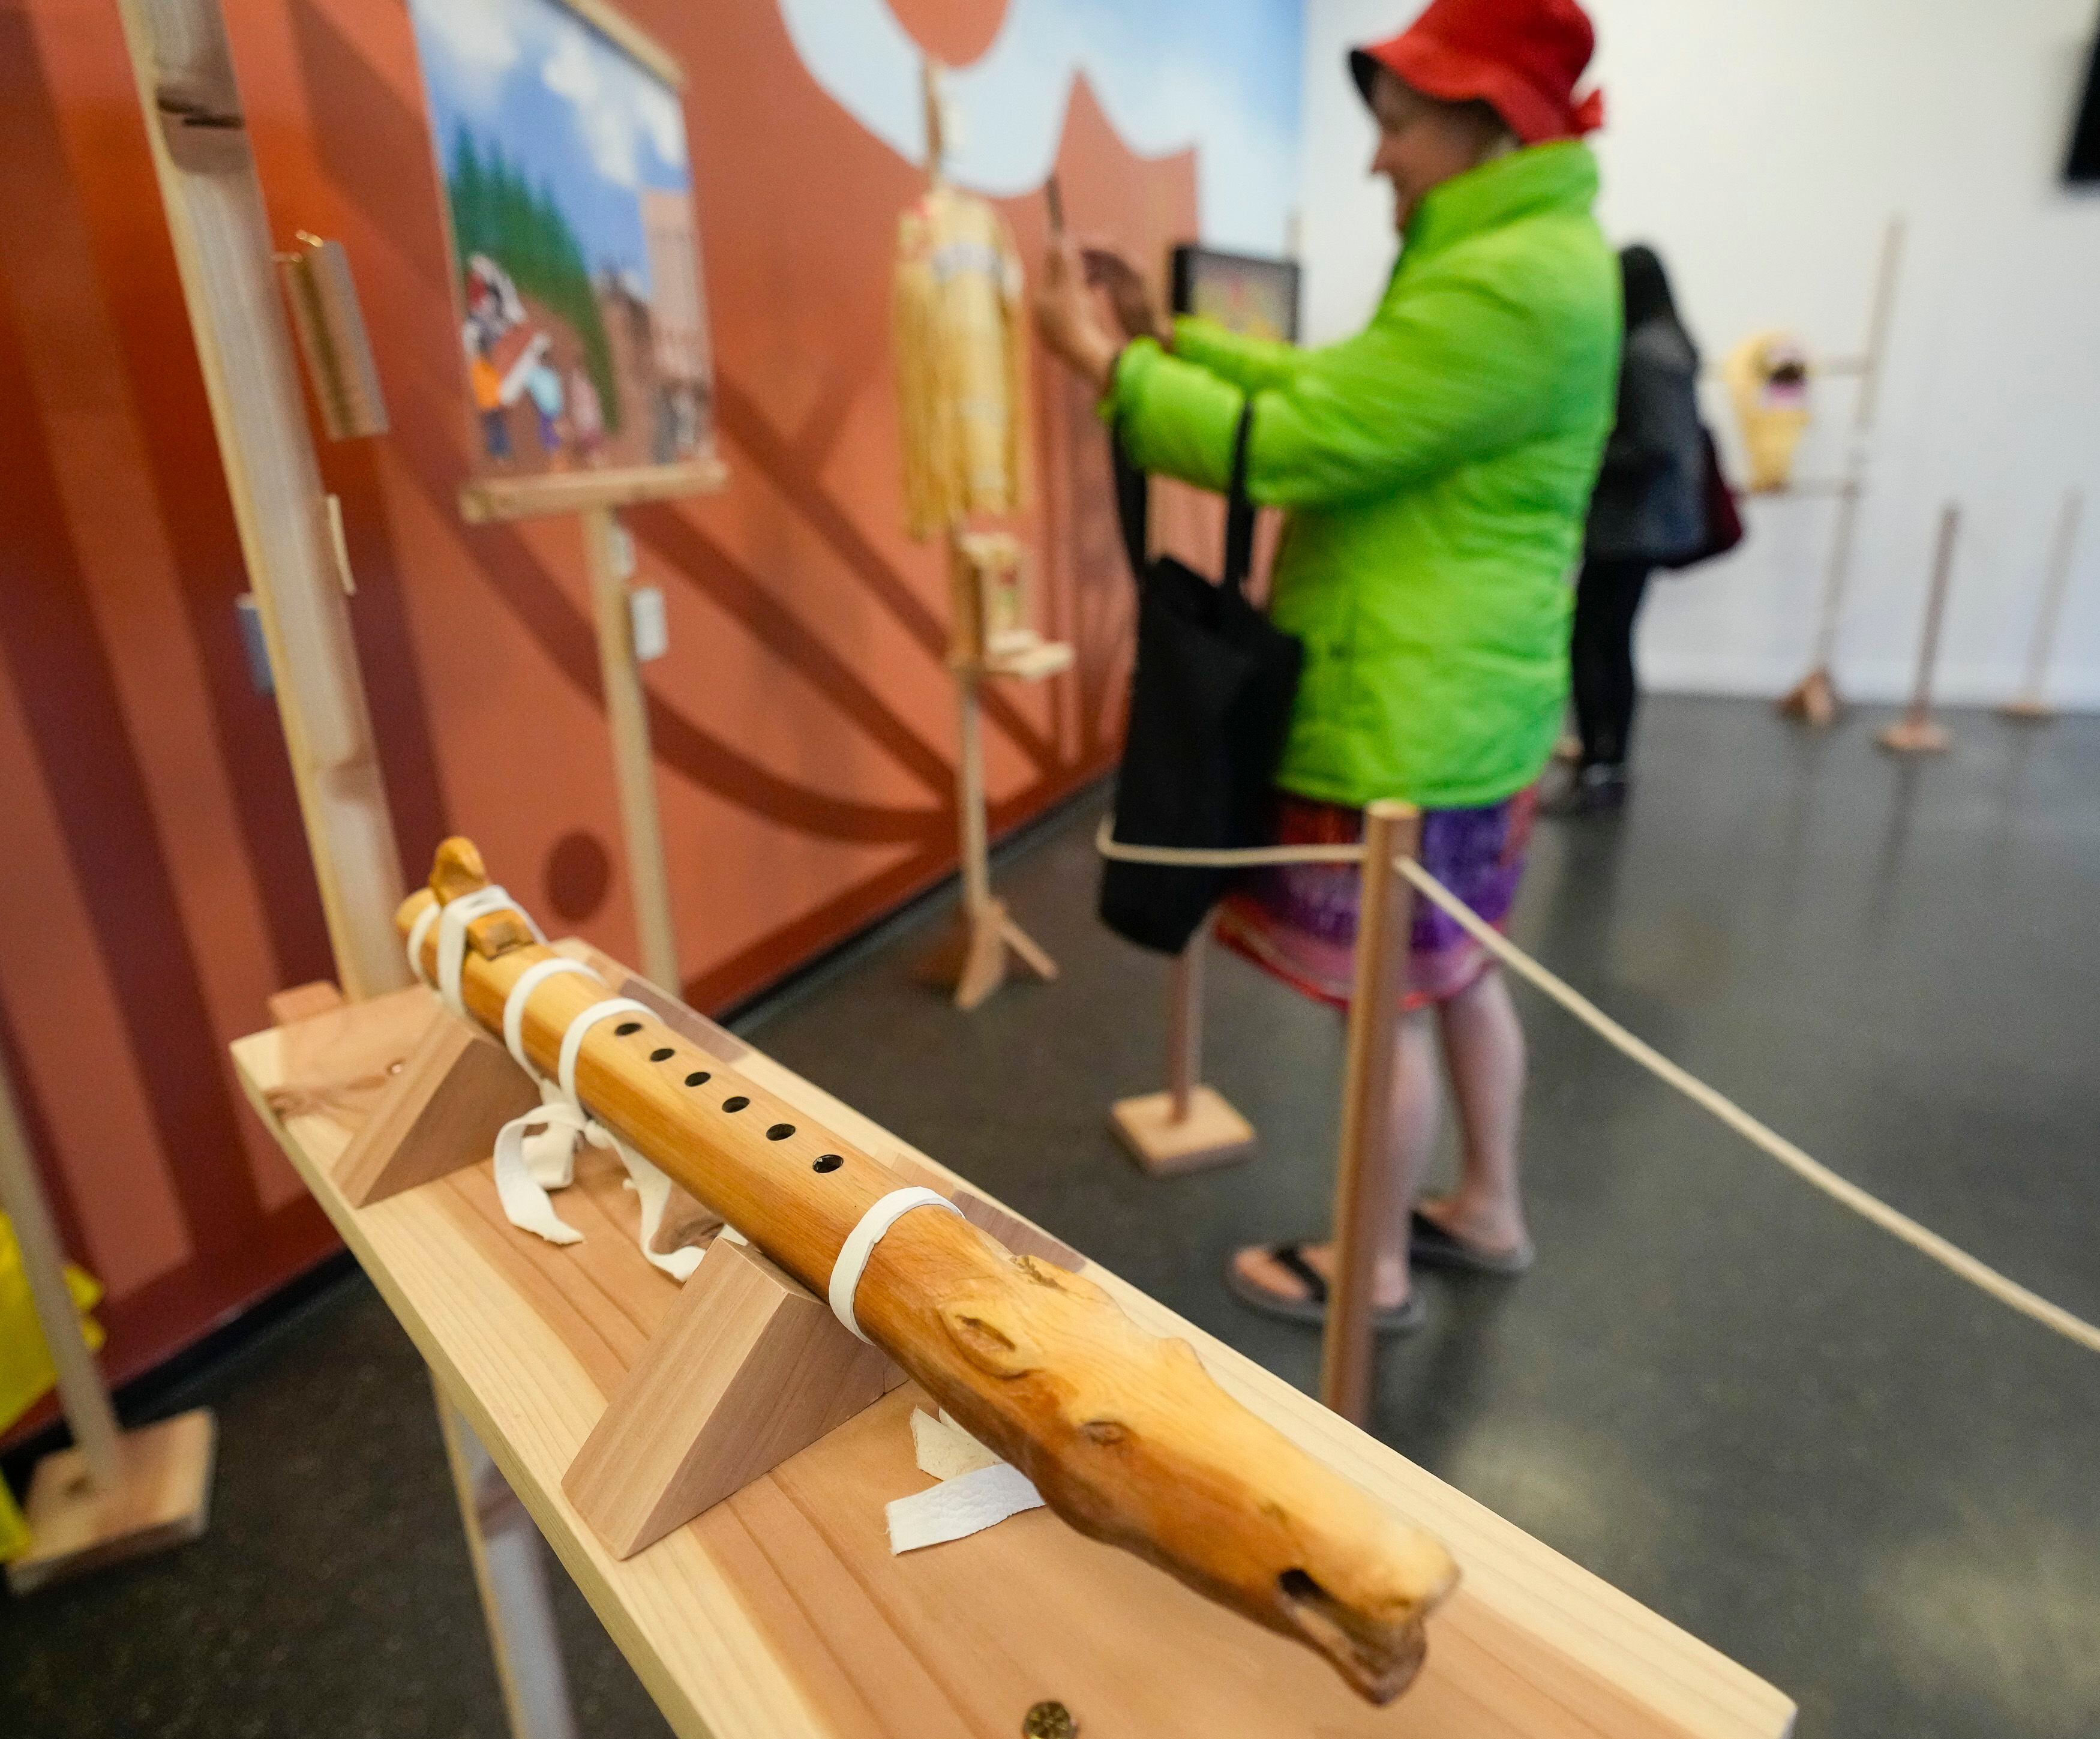 (Bethany Baker | The Salt Lake Tribune) A traditional Ute flute made from cedar by Aldean Ketchum, aka Lightning Hawk, sits on display during the opening event for the "100 Years of Silence" exhibition at The Leonardo in Salt Lake City on Saturday, March 23, 2024.